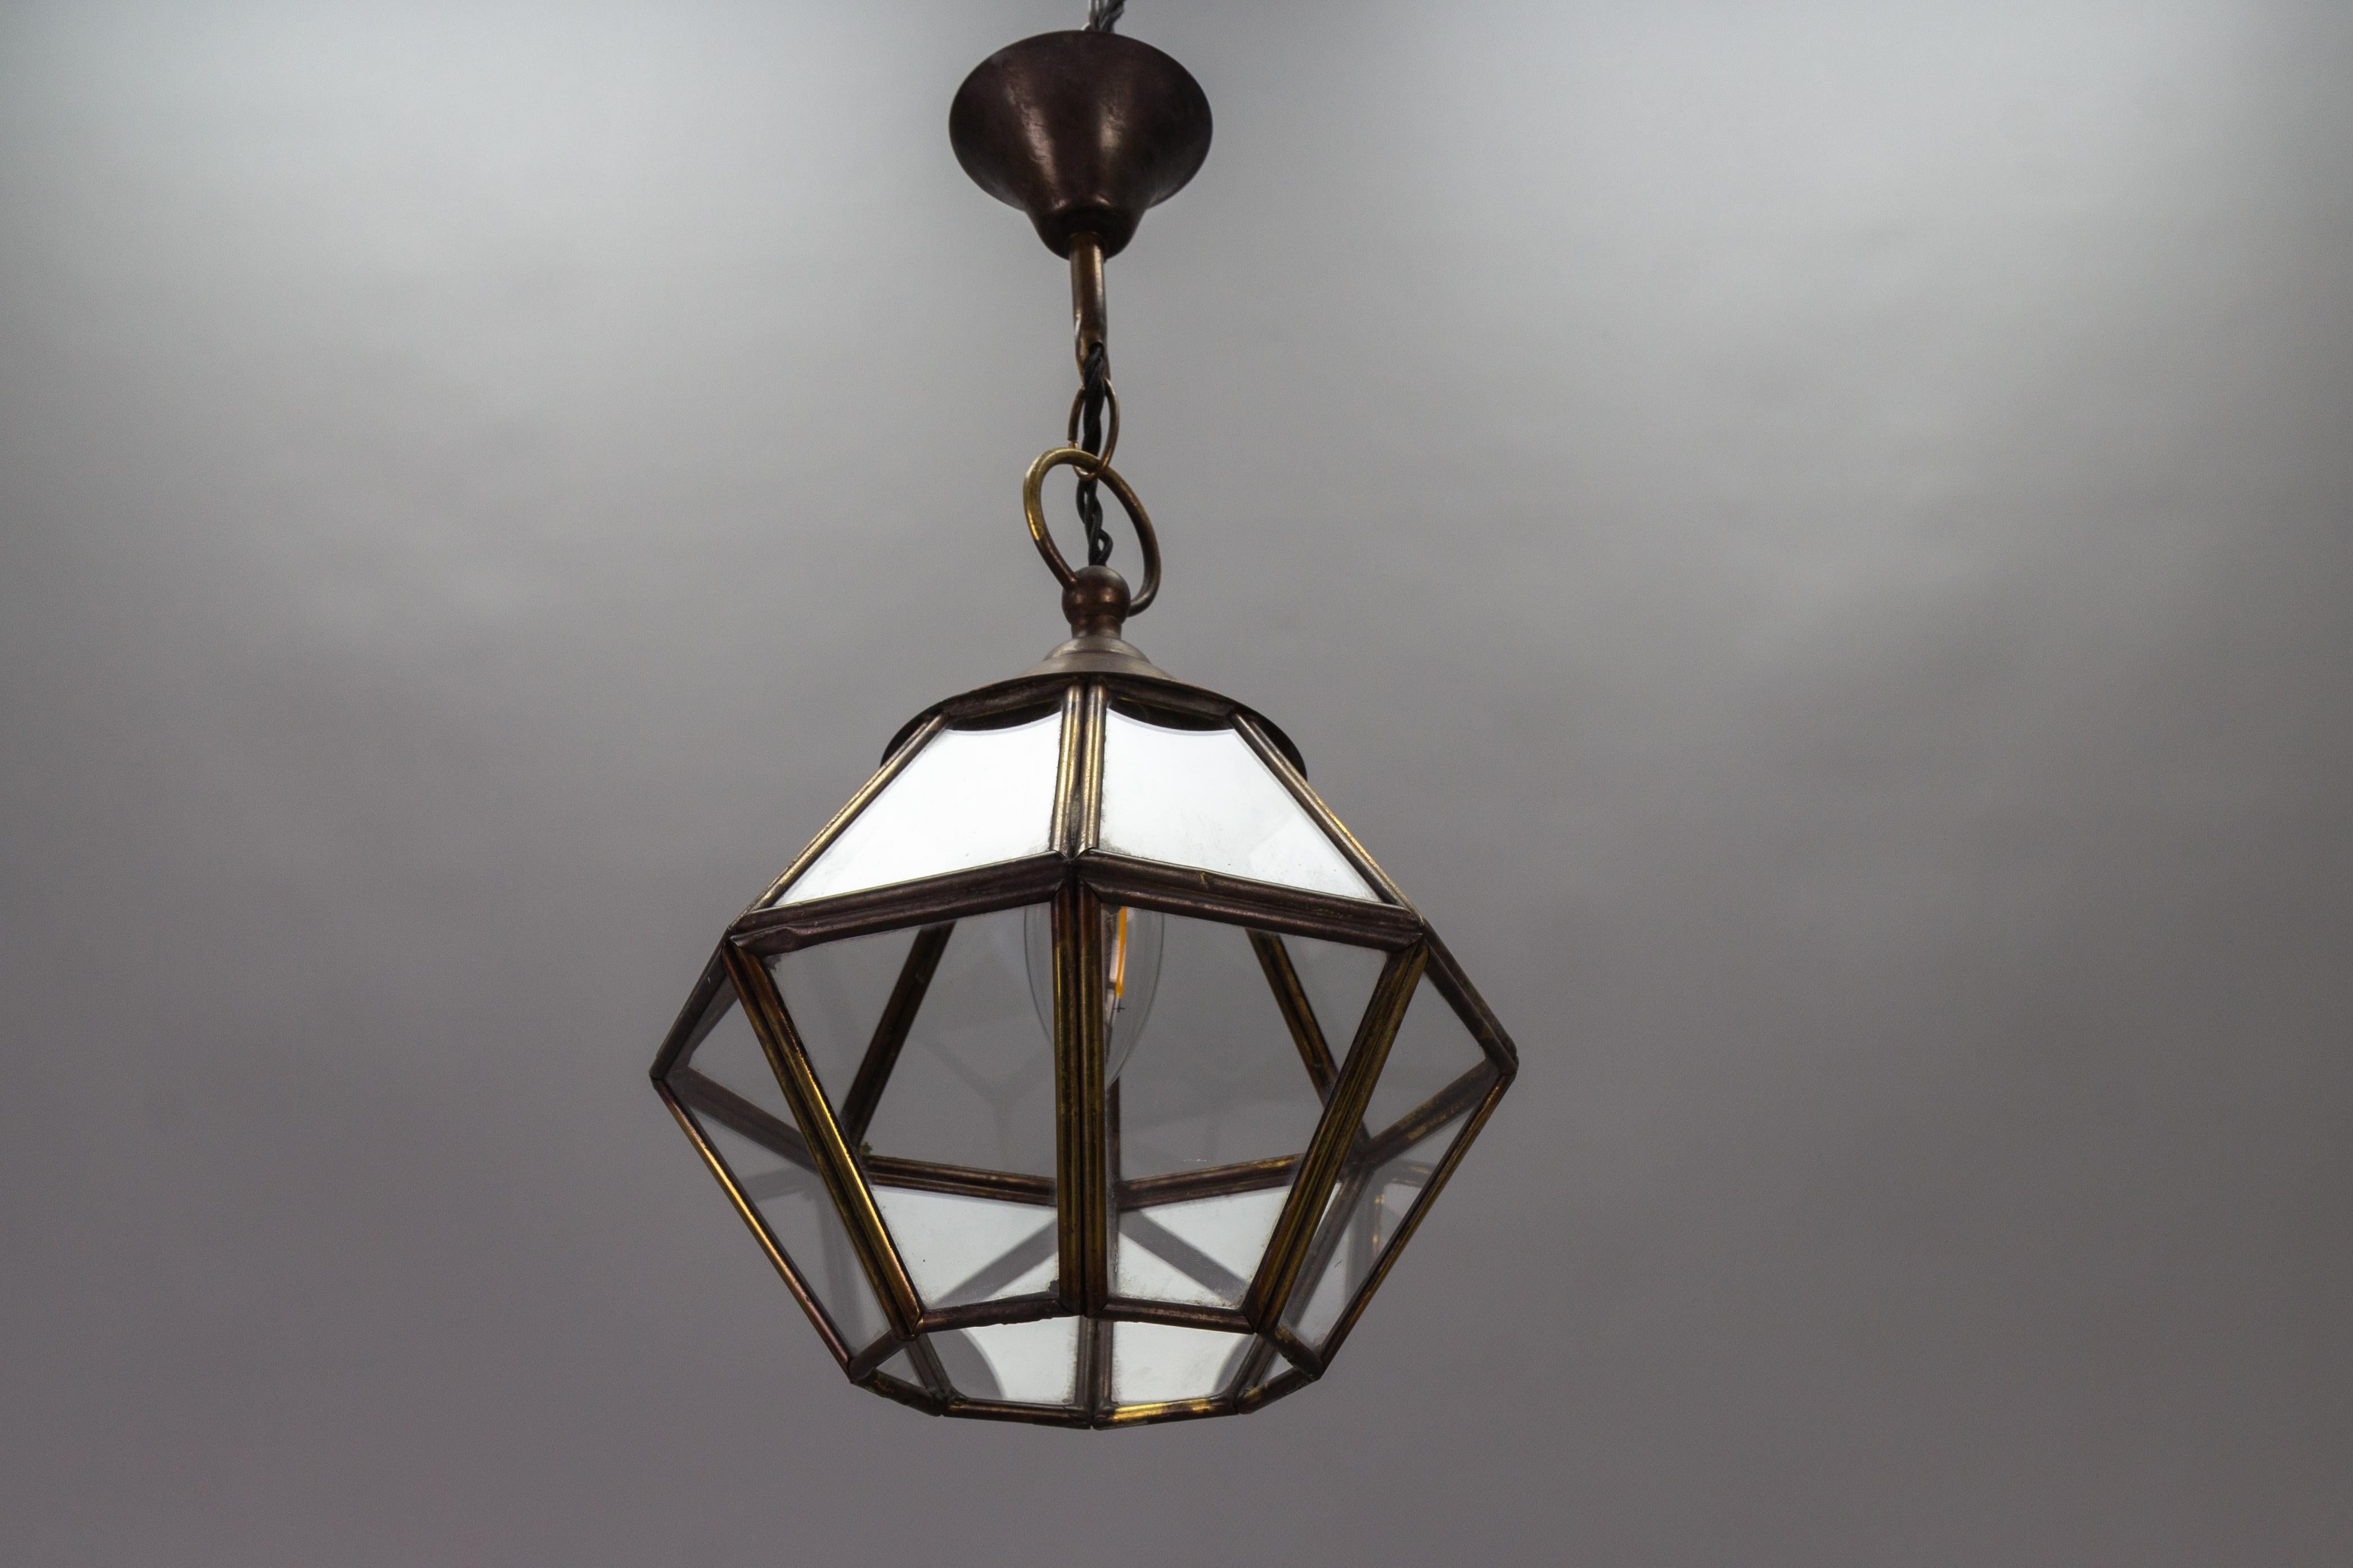 French Midcentury-Modern brass and clear glass octagonal hanging lantern from circa the 1950s.
This adorable and compact vintage single-light pendant lantern features an octagonal brass frame with clear glass panels.
One socket for B22 size light